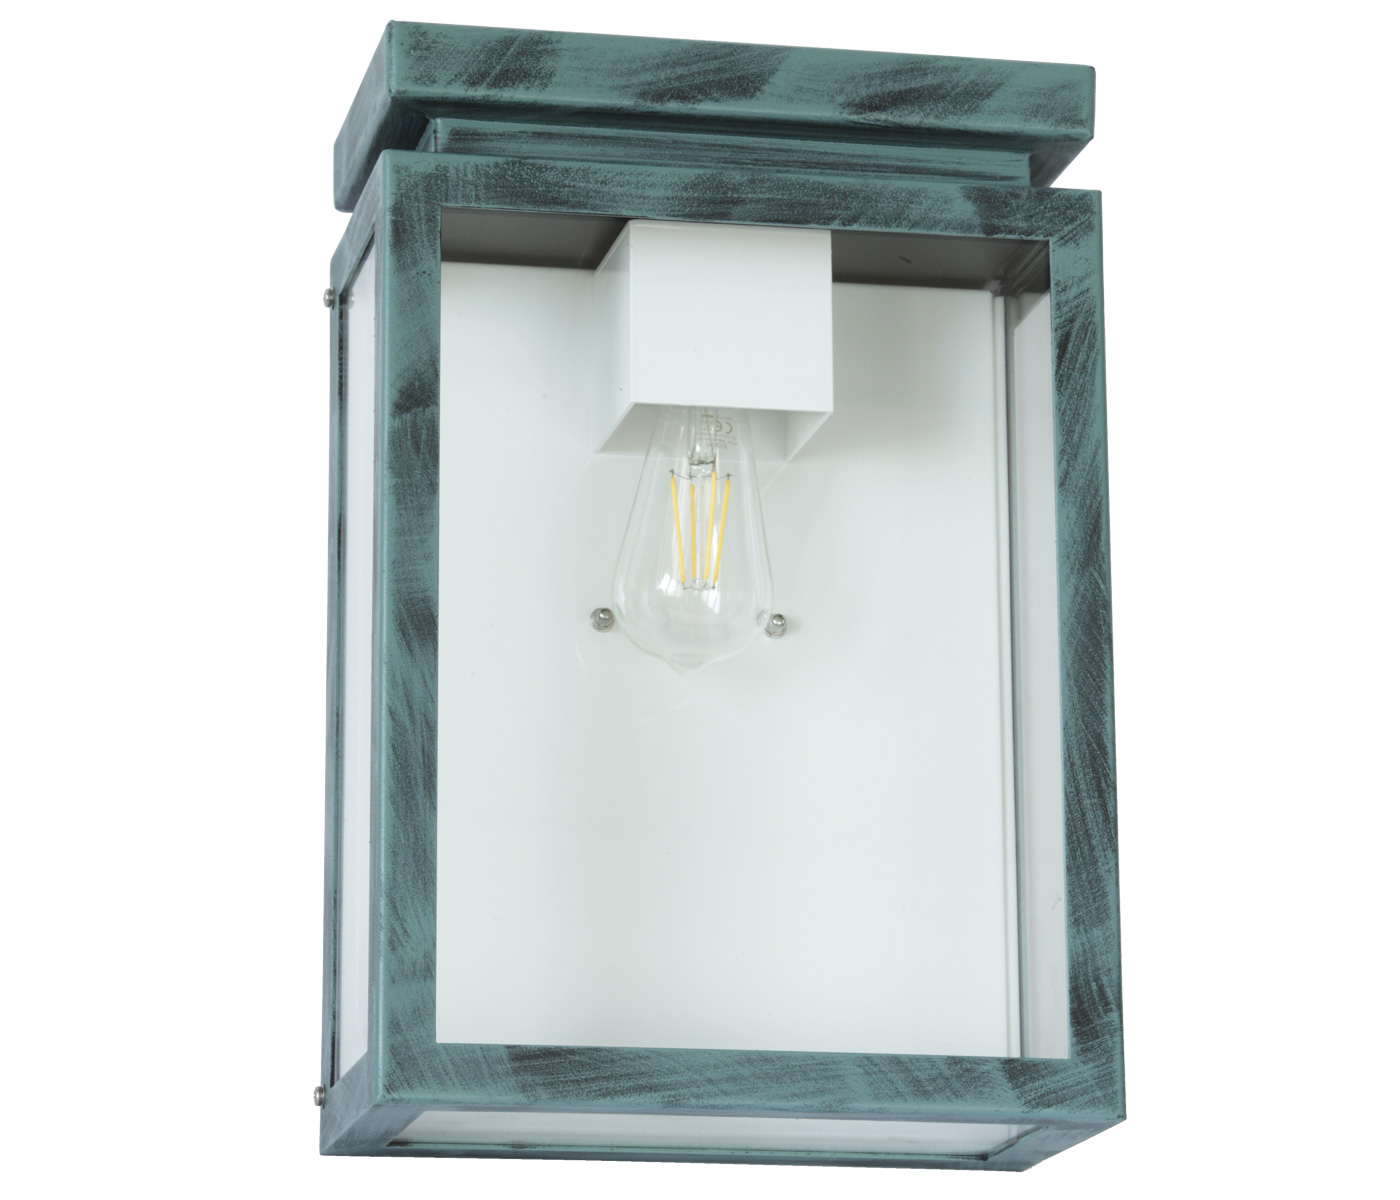 Square Wall Light Made of Stainless Steel for Outdoors